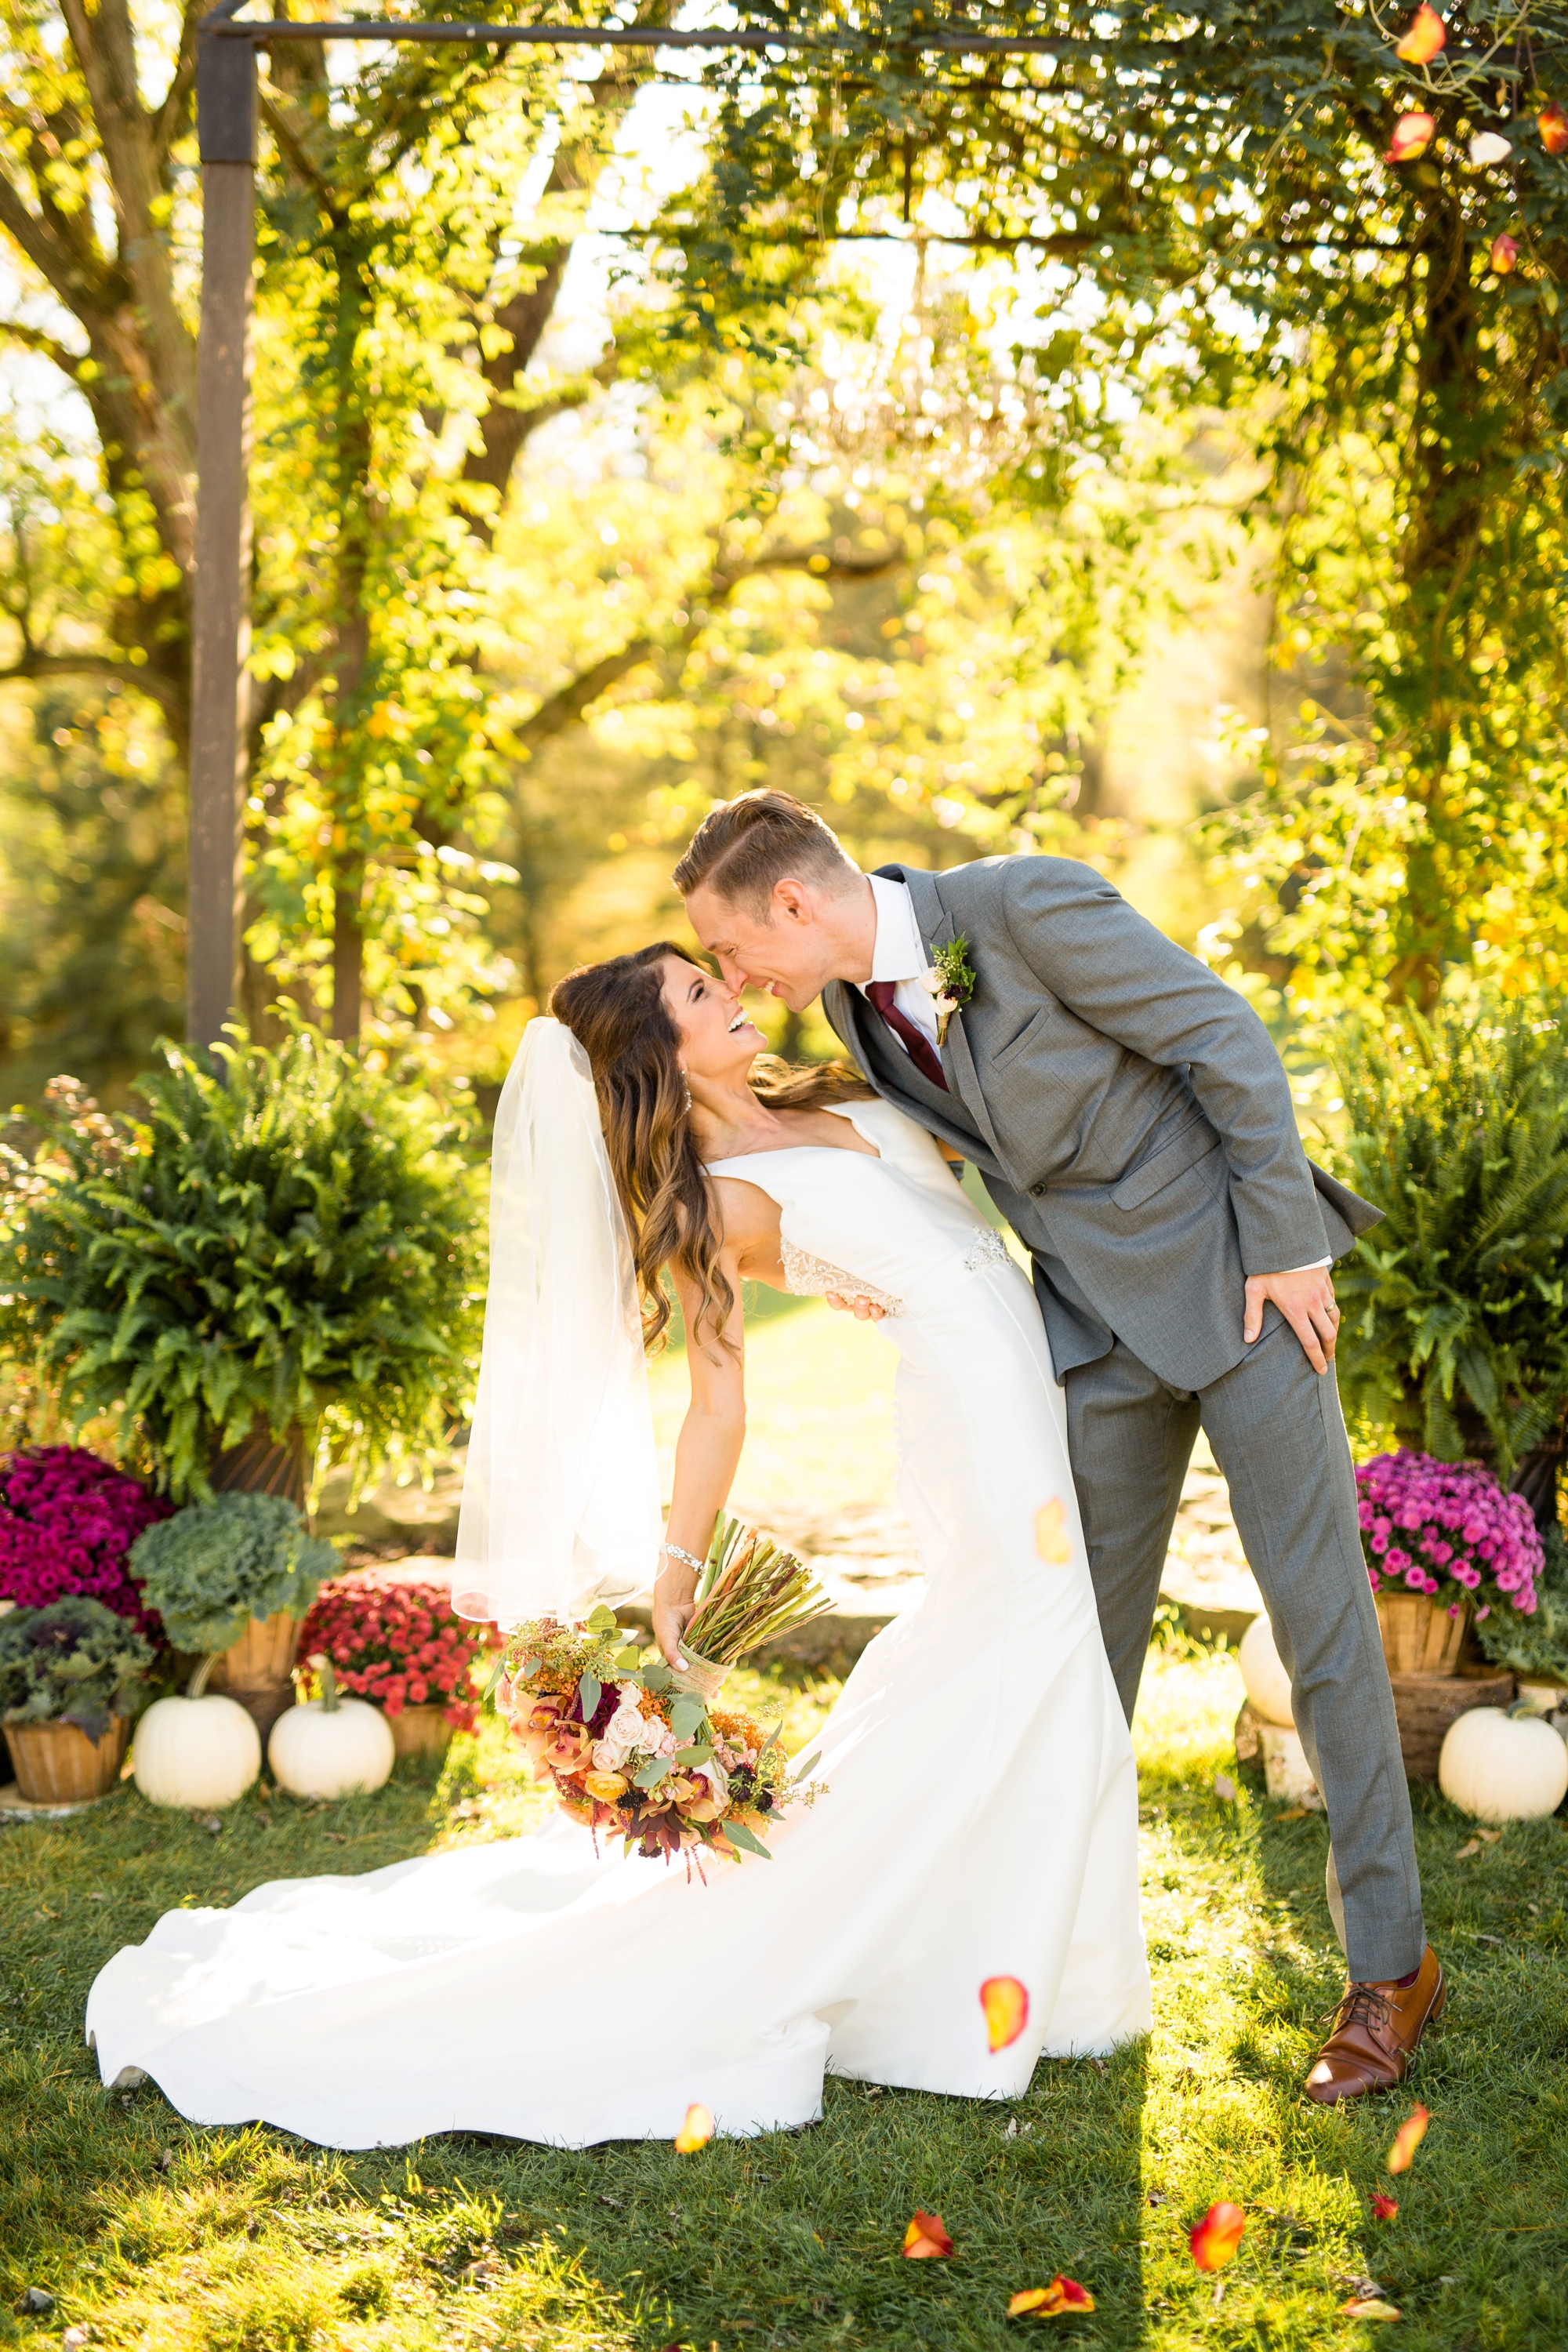 shady elms farm wedding, shady elms farm wedding pictures, pittsburgh wedding venues, farm wedding venues pittsburgh, pittsburgh wedding photographer, shady elms wedding photographer